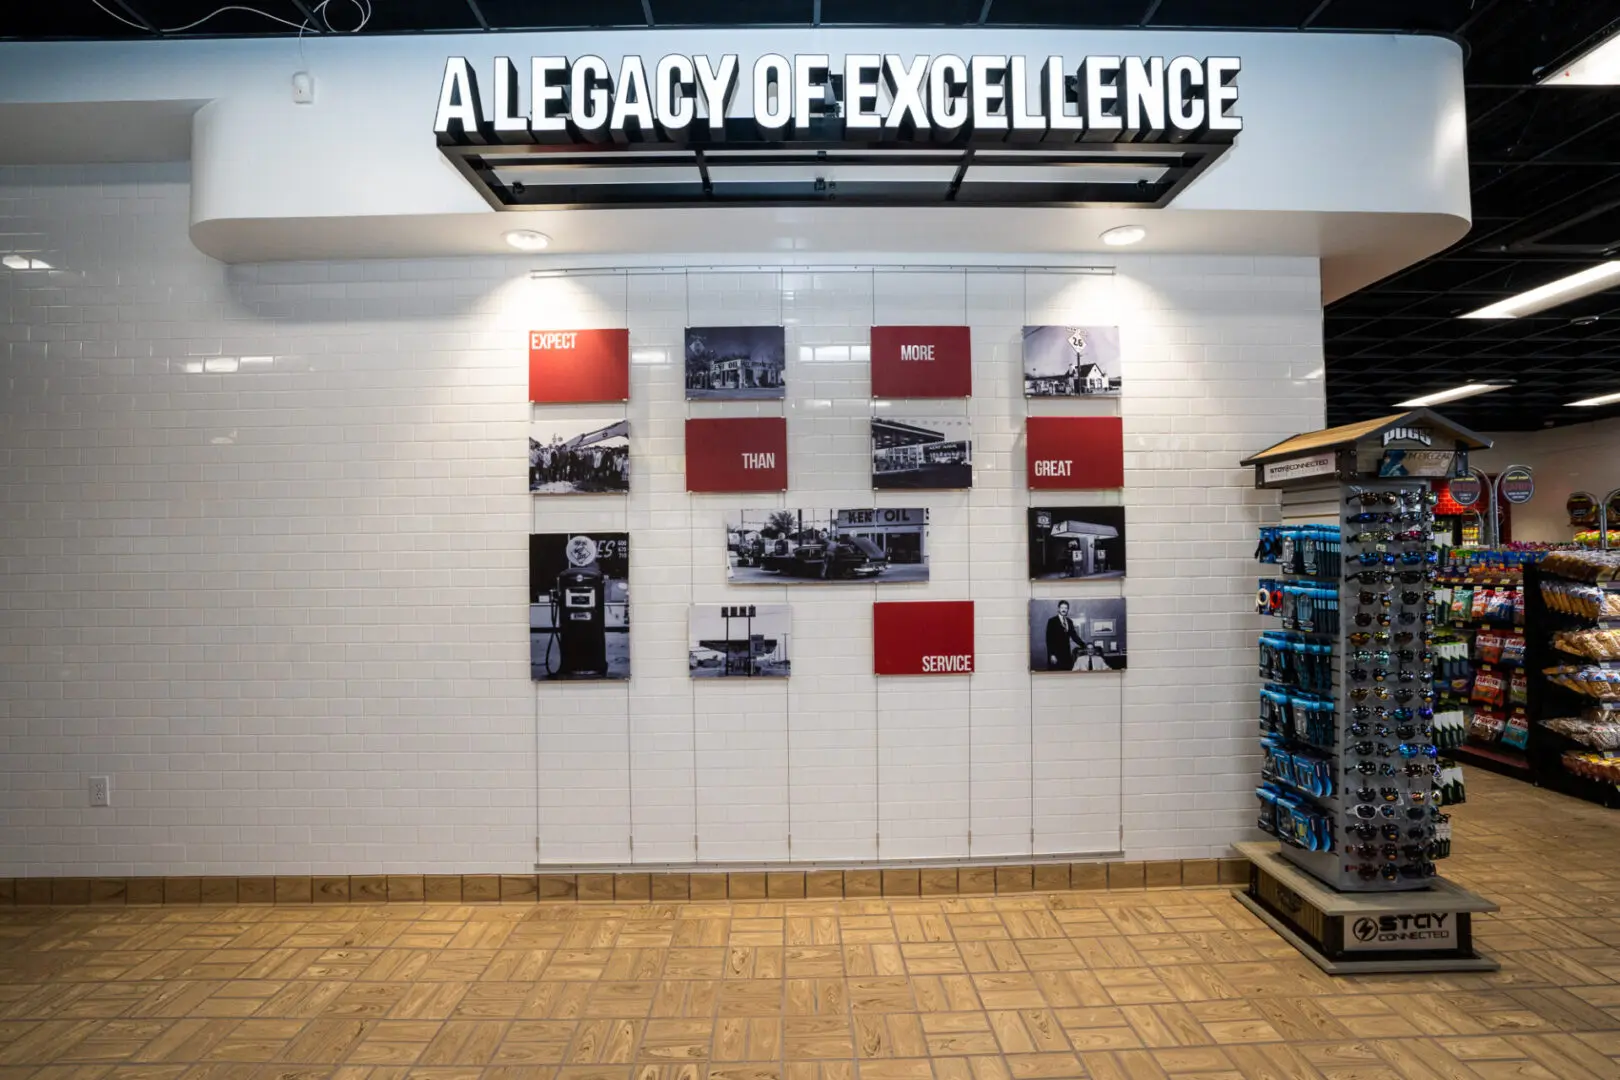 A legacy of excellence name board on the display